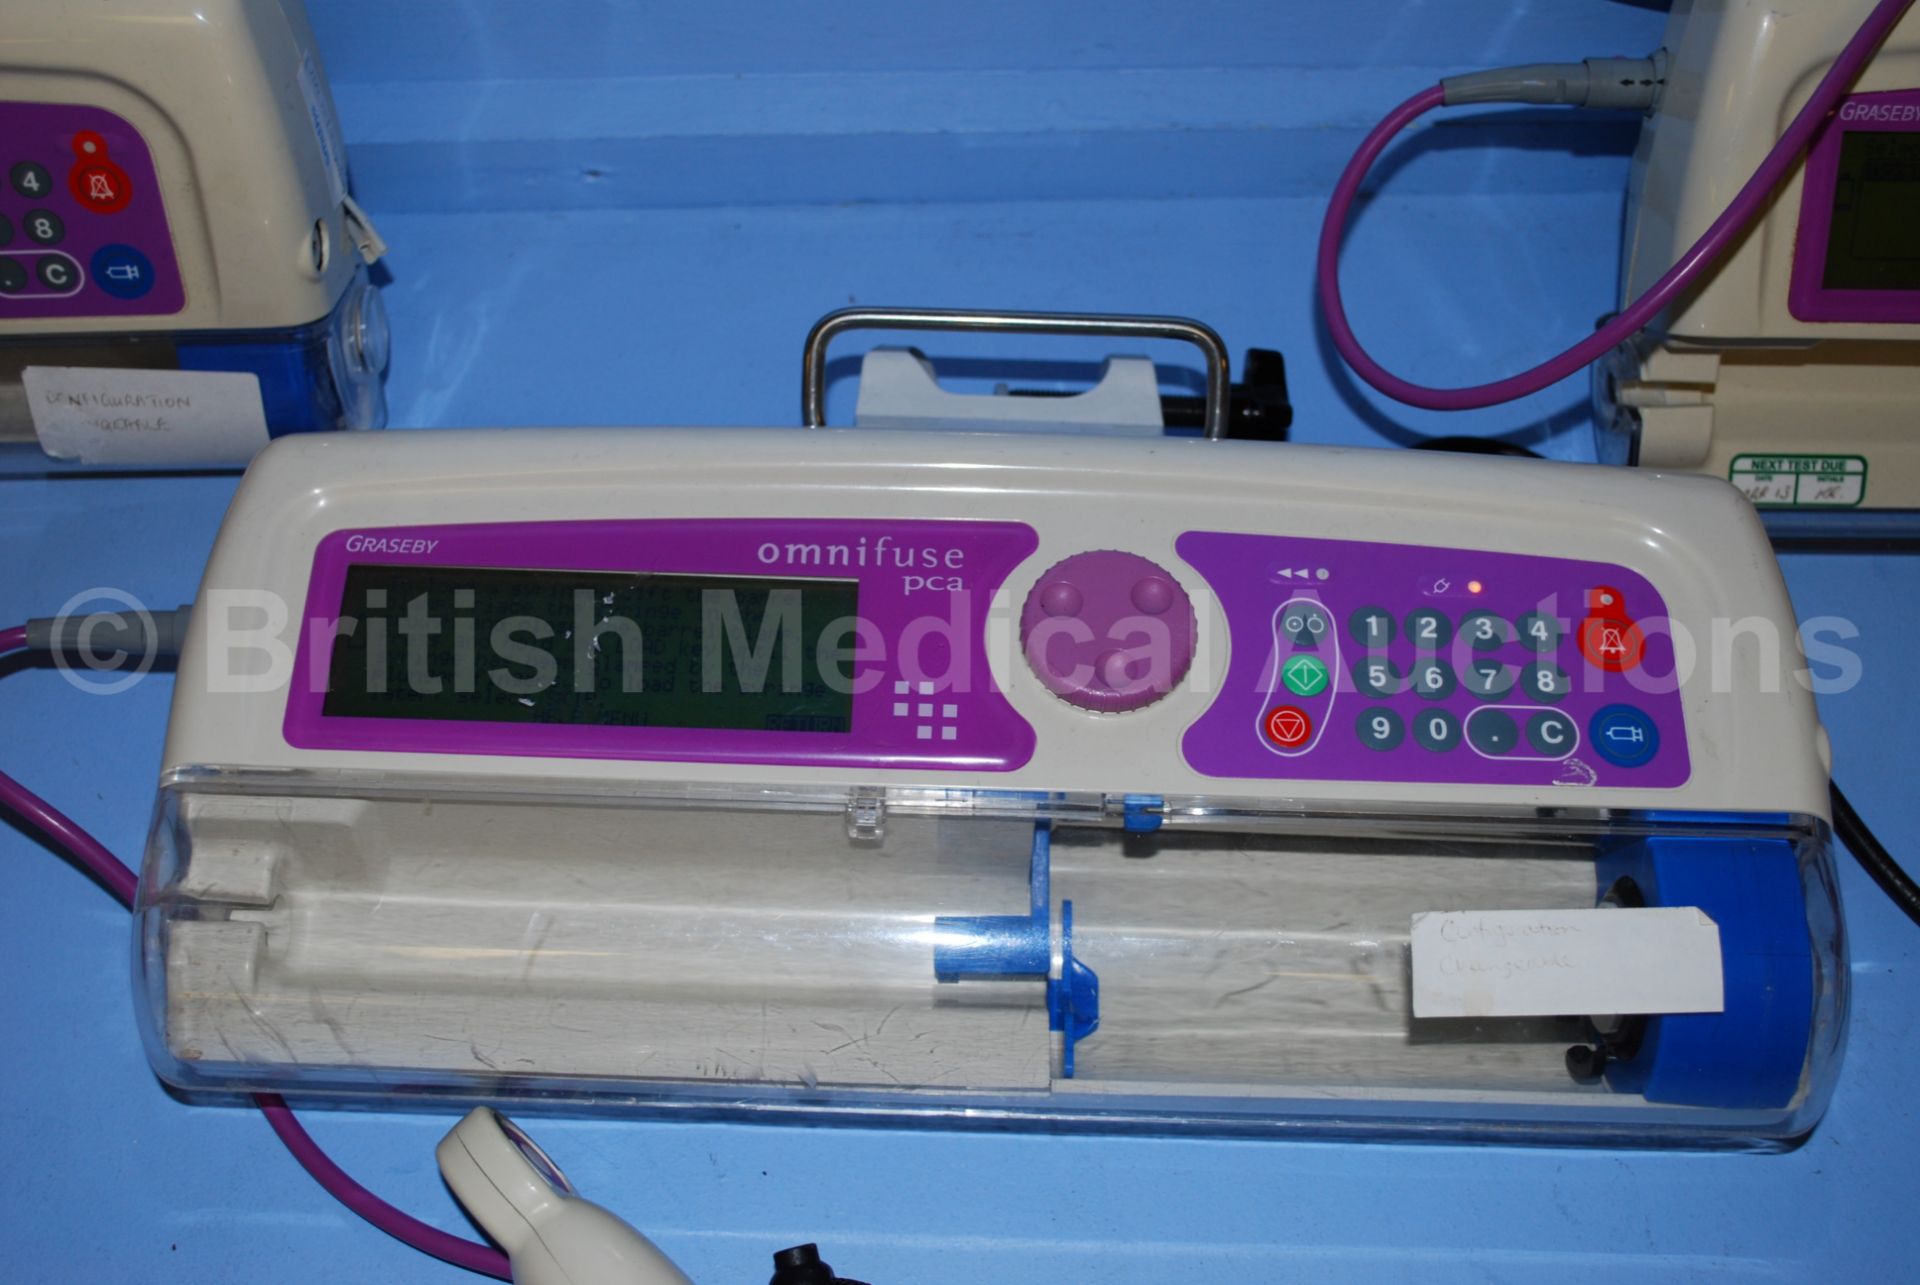 3 x Graseby Omnifuse pca Syringe Pumps with pca Co - Image 3 of 4